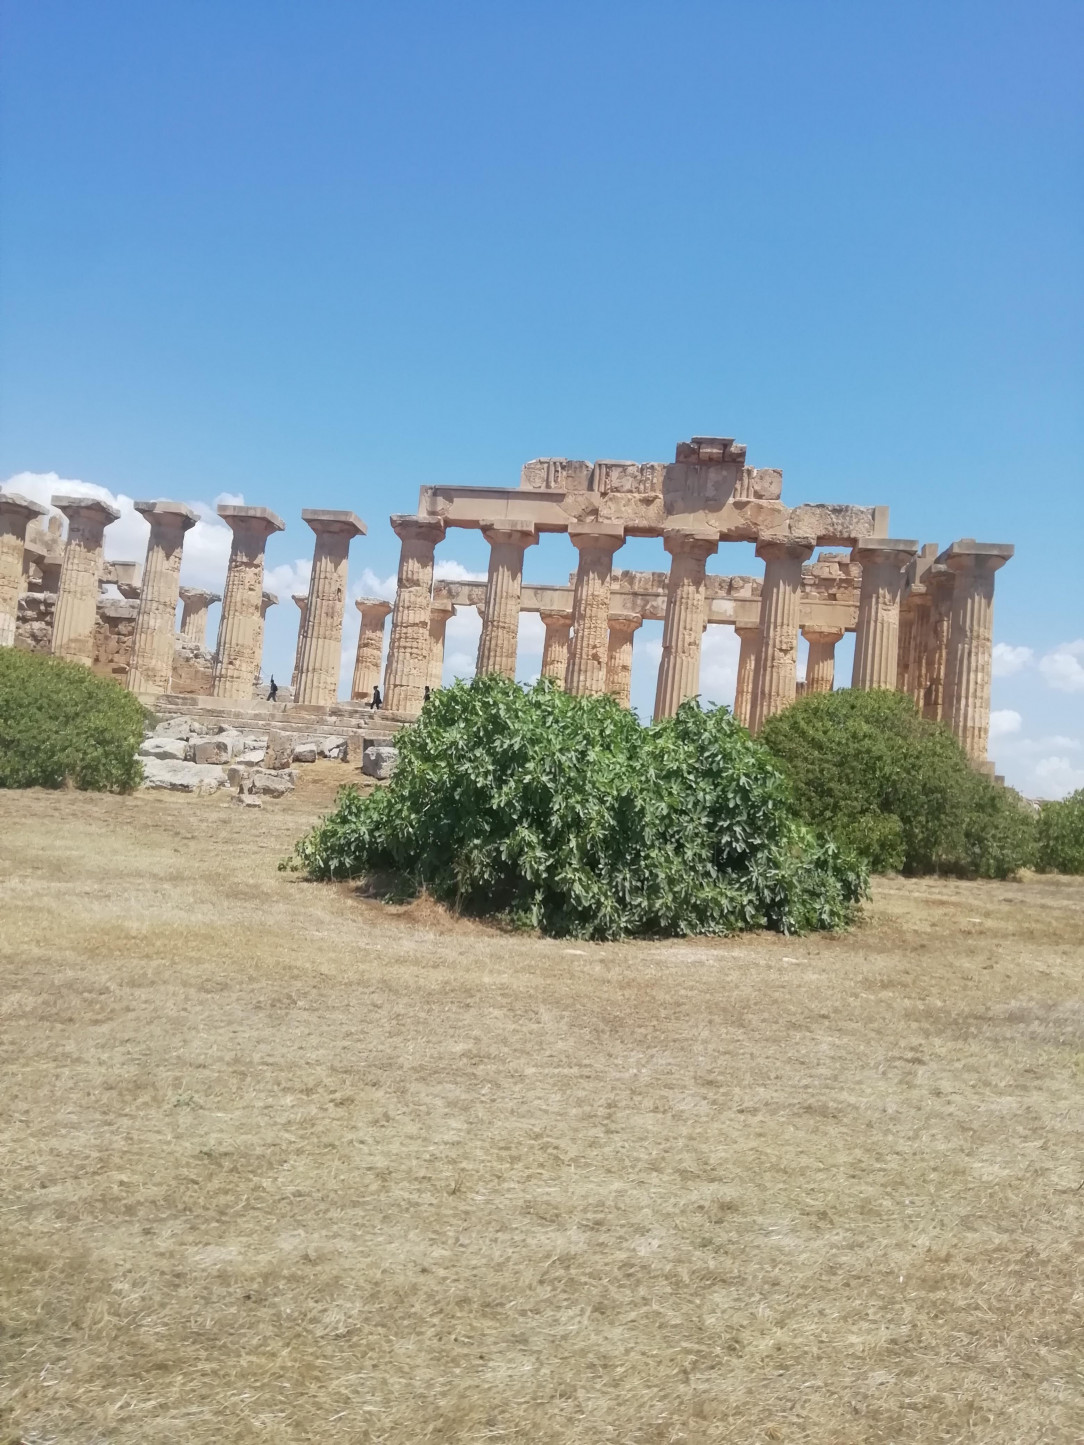 One of the temples of Selinunte, an ancient greek town in Sicily